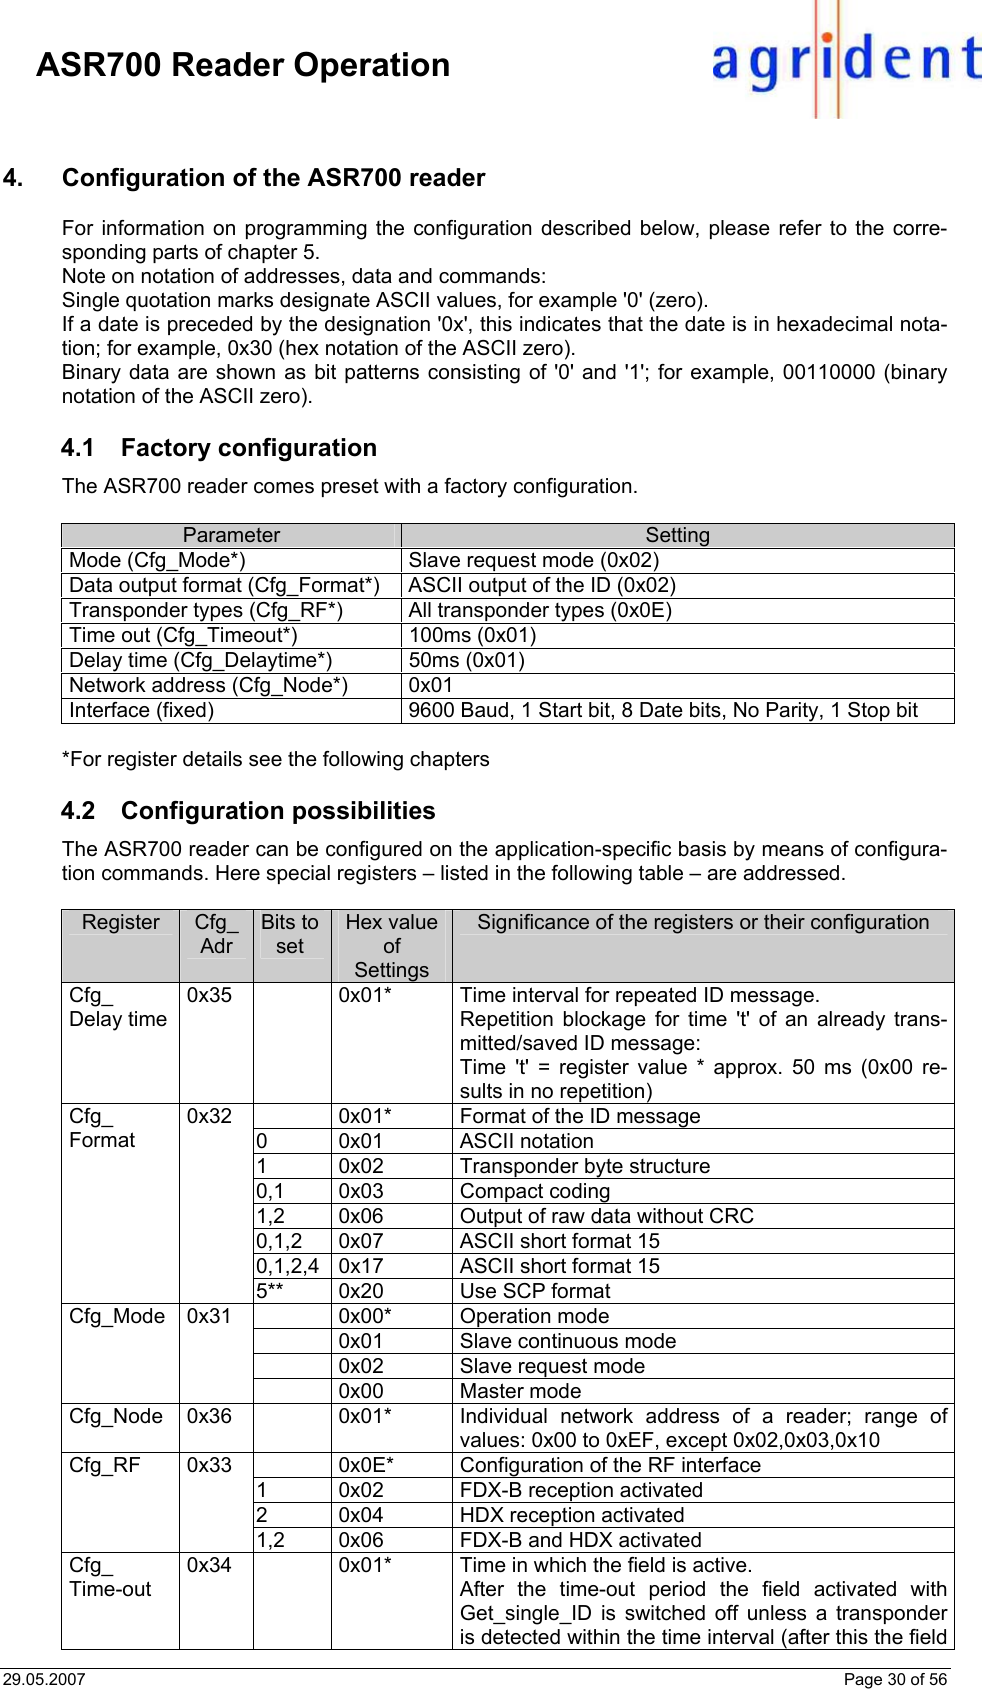 29.05.2007    Page 30 of 56     ASR700 Reader Operation 4.  Configuration of the ASR700 reader For information on programming the configuration described below, please refer to the corre-sponding parts of chapter 5. Note on notation of addresses, data and commands: Single quotation marks designate ASCII values, for example &apos;0&apos; (zero). If a date is preceded by the designation &apos;0x&apos;, this indicates that the date is in hexadecimal nota-tion; for example, 0x30 (hex notation of the ASCII zero). Binary data are shown as bit patterns consisting of &apos;0&apos; and &apos;1&apos;; for example, 00110000 (binary notation of the ASCII zero).   4.1 Factory configuration The ASR700 reader comes preset with a factory configuration.  Parameter  Setting Mode (Cfg_Mode*)  Slave request mode (0x02) Data output format (Cfg_Format*)  ASCII output of the ID (0x02) Transponder types (Cfg_RF*)  All transponder types (0x0E) Time out (Cfg_Timeout*)  100ms (0x01) Delay time (Cfg_Delaytime*)  50ms (0x01) Network address (Cfg_Node*)  0x01 Interface (fixed)  9600 Baud, 1 Start bit, 8 Date bits, No Parity, 1 Stop bit  *For register details see the following chapters  4.2 Configuration possibilities The ASR700 reader can be configured on the application-specific basis by means of configura-tion commands. Here special registers – listed in the following table – are addressed.  Register  Cfg_ Adr Bits to set Hex value of Settings Significance of the registers or their configuration Cfg_ Delay time 0x35    0x01*  Time interval for repeated ID message. Repetition blockage for time &apos;t&apos; of an already trans-mitted/saved ID message: Time &apos;t&apos; = register value * approx. 50 ms (0x00 re-sults in no repetition)   0x01*  Format of the ID message 0 0x01  ASCII notation 1  0x02  Transponder byte structure 0,1 0x03  Compact coding 1,2 0x06  Output of raw data without CRC 0,1,2  0x07  ASCII short format 15 0,1,2,4  0x17  ASCII short format 15 Cfg_ Format 0x32 5**  0x20  Use SCP format  0x00* Operation mode   0x01  Slave continuous mode   0x02  Slave request mode Cfg_Mode 0x31  0x00 Master mode Cfg_Node 0x36   0x01*  Individual network address of a reader; range of values: 0x00 to 0xEF, except 0x02,0x03,0x10   0x0E*  Configuration of the RF interface 1  0x02  FDX-B reception activated 2  0x04  HDX reception activated Cfg_RF 0x33 1,2  0x06  FDX-B and HDX activated Cfg_ Time-out 0x34    0x01*  Time in which the field is active. After the time-out period the field activated with Get_single_ID is switched off unless a transponder is detected within the time interval (after this the field 